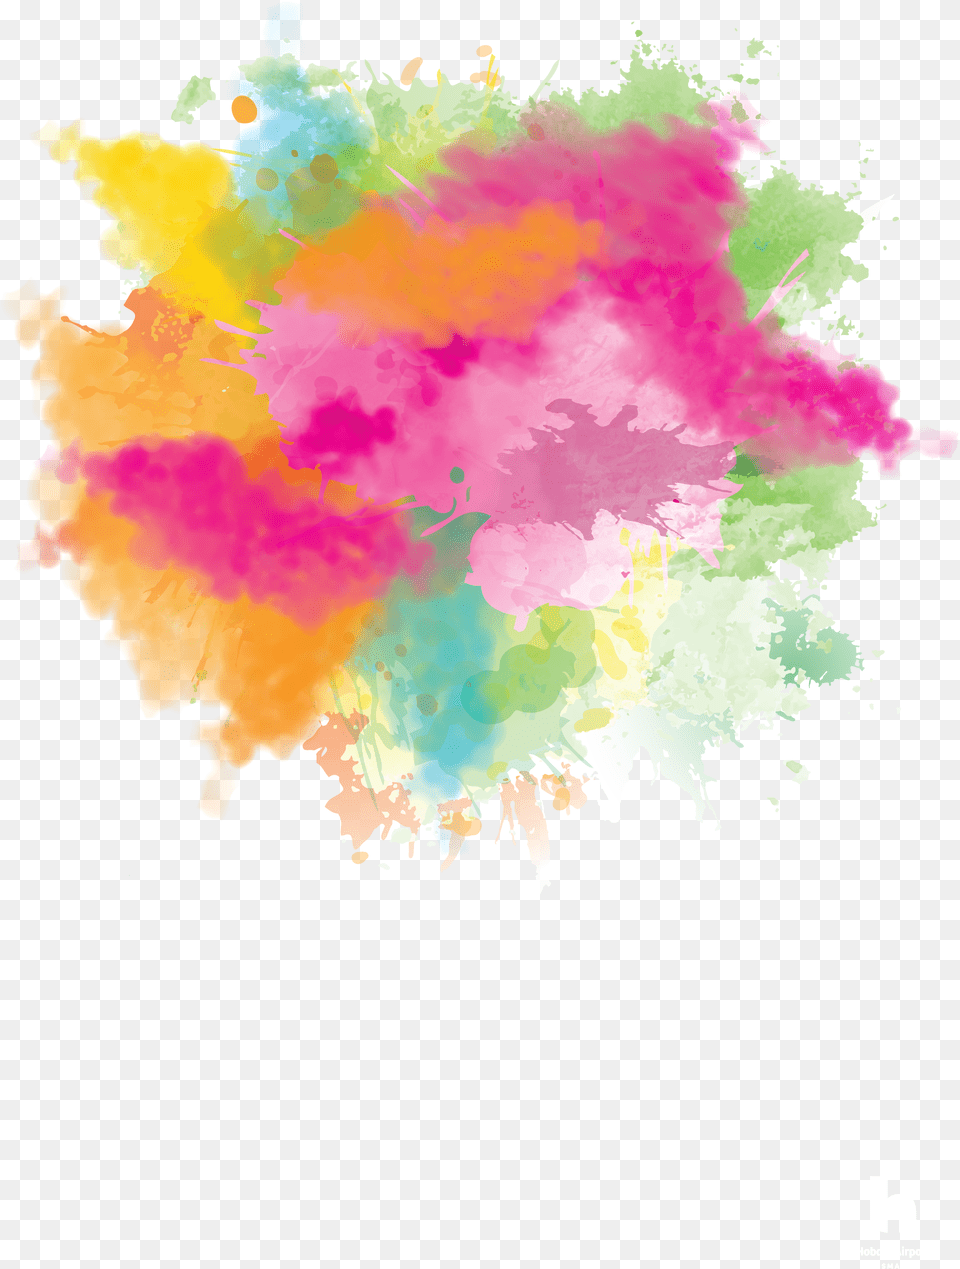 Download Hd 15c Mostly Cloudy Image Splatter High Resolution Watercolor Paint, Art, Graphics, Bonfire, Fire Png